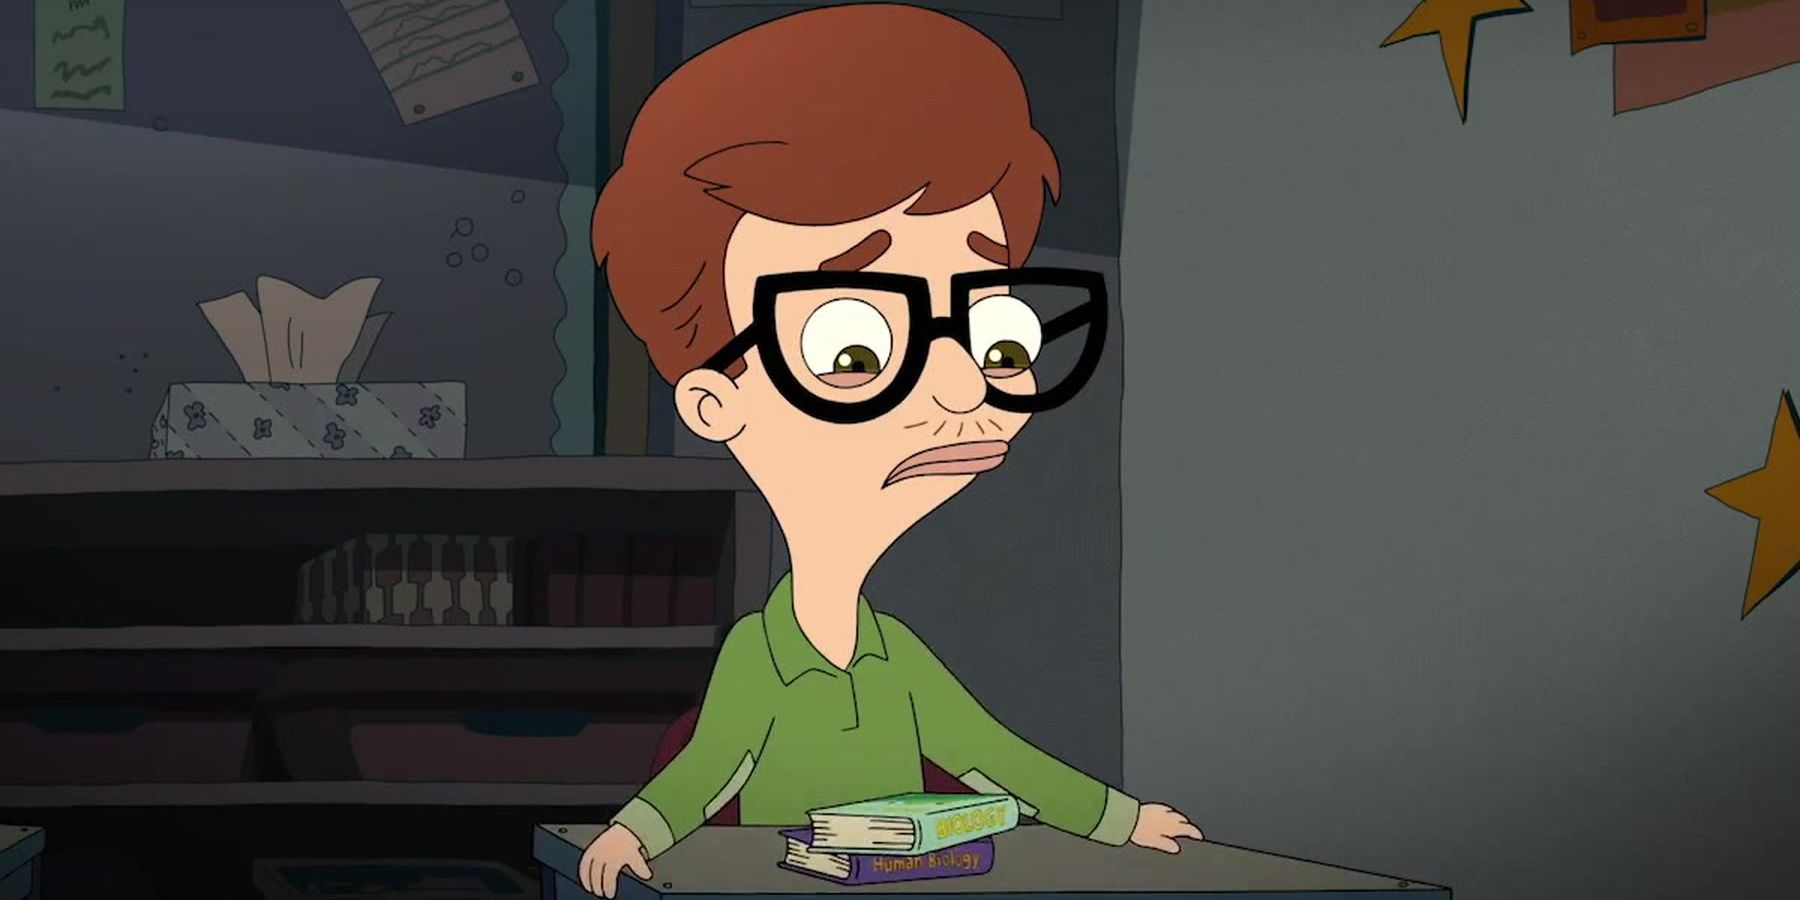 Andrew looks sad and conflicted in Big Mouth